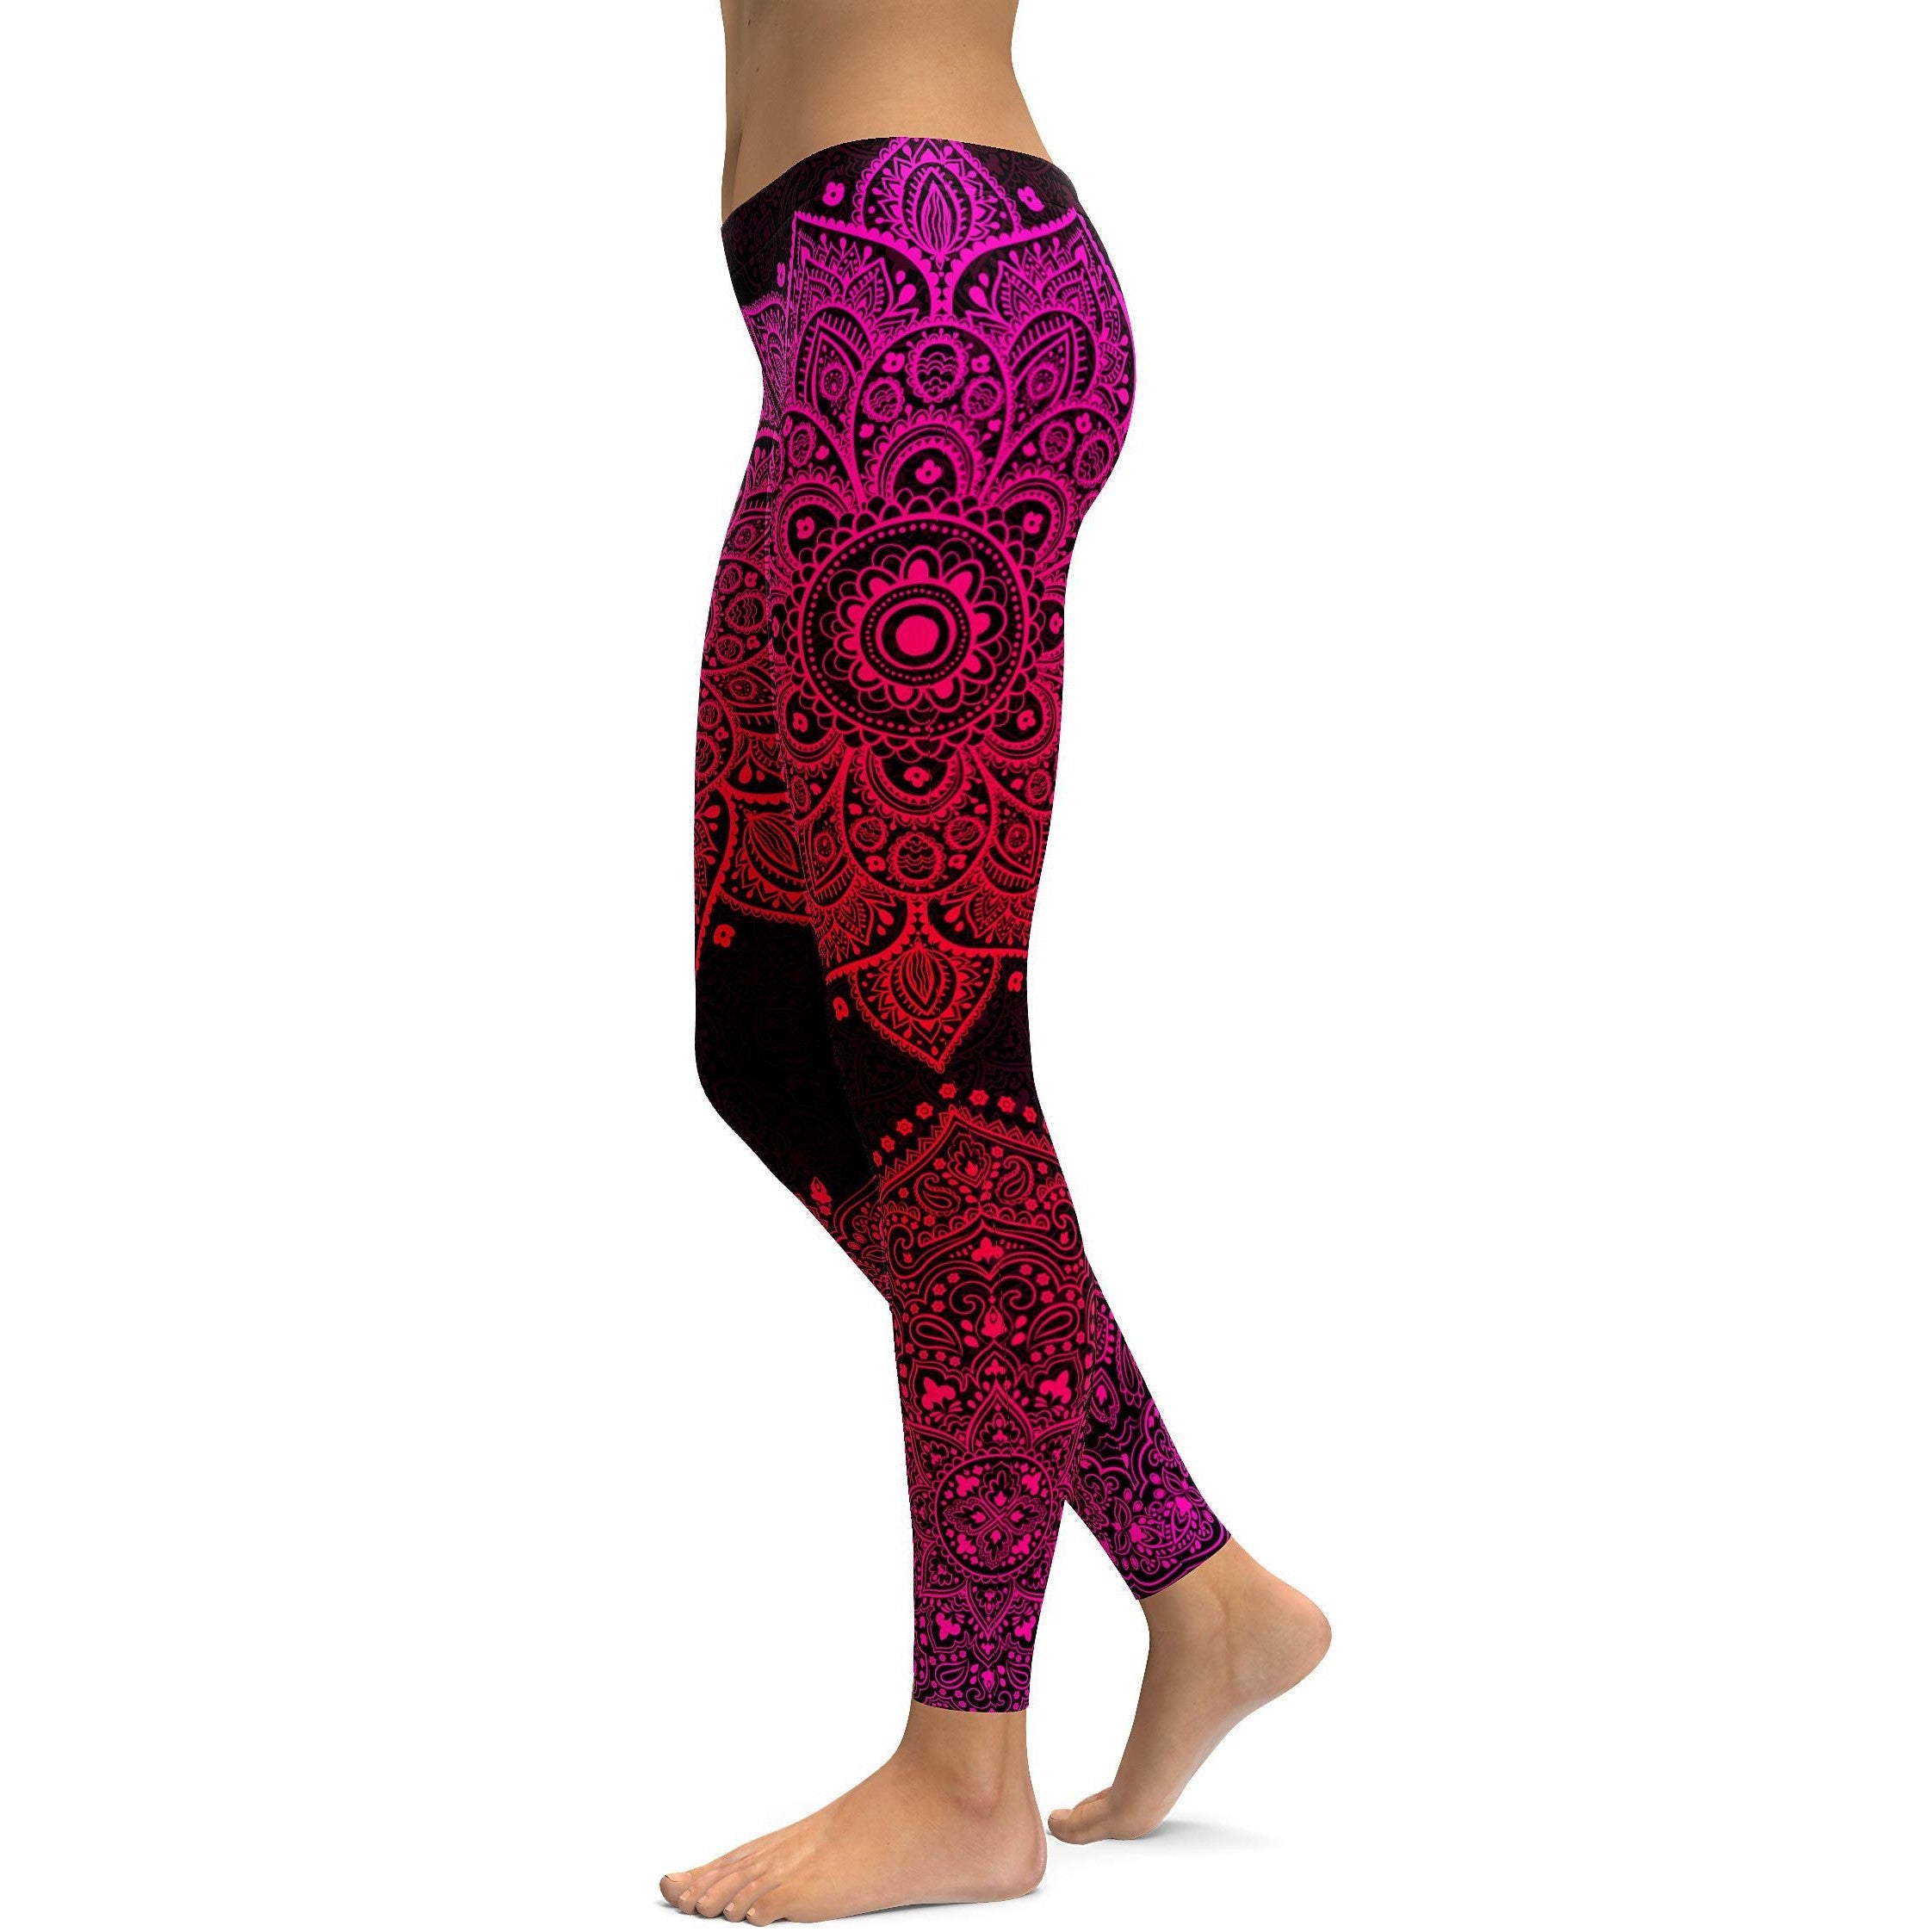 Womens Sports and Fitness Leggings - S M L XL Yoga Pants - Vibrant Stretchy  Gym